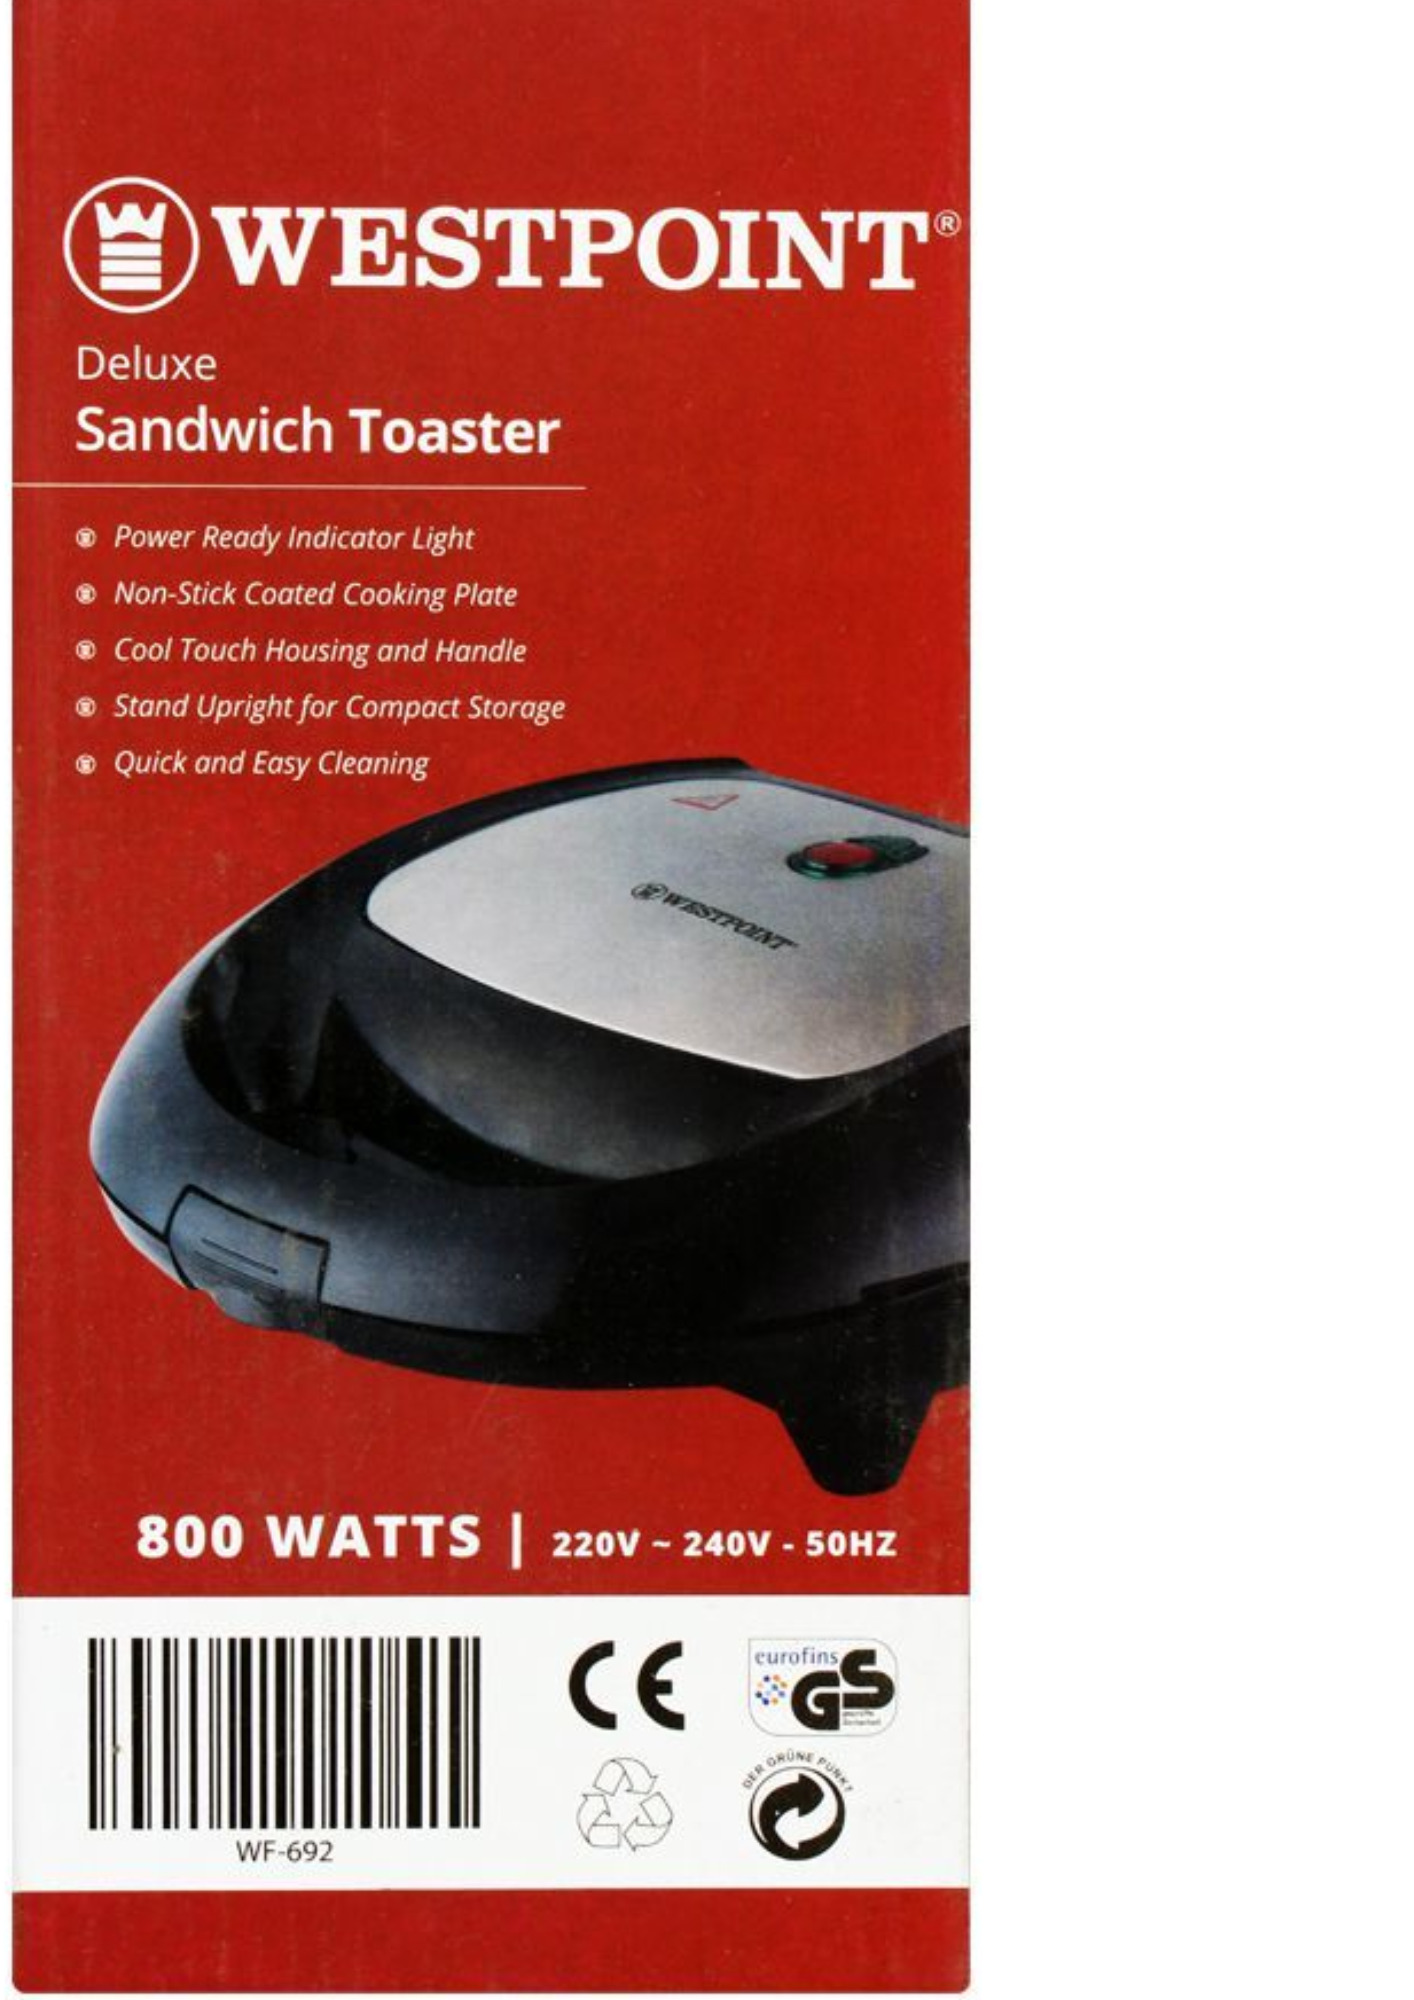 Westpoint sandwich maker 692Salman Electornics electronics appliances on easy monthly installment and free delivery